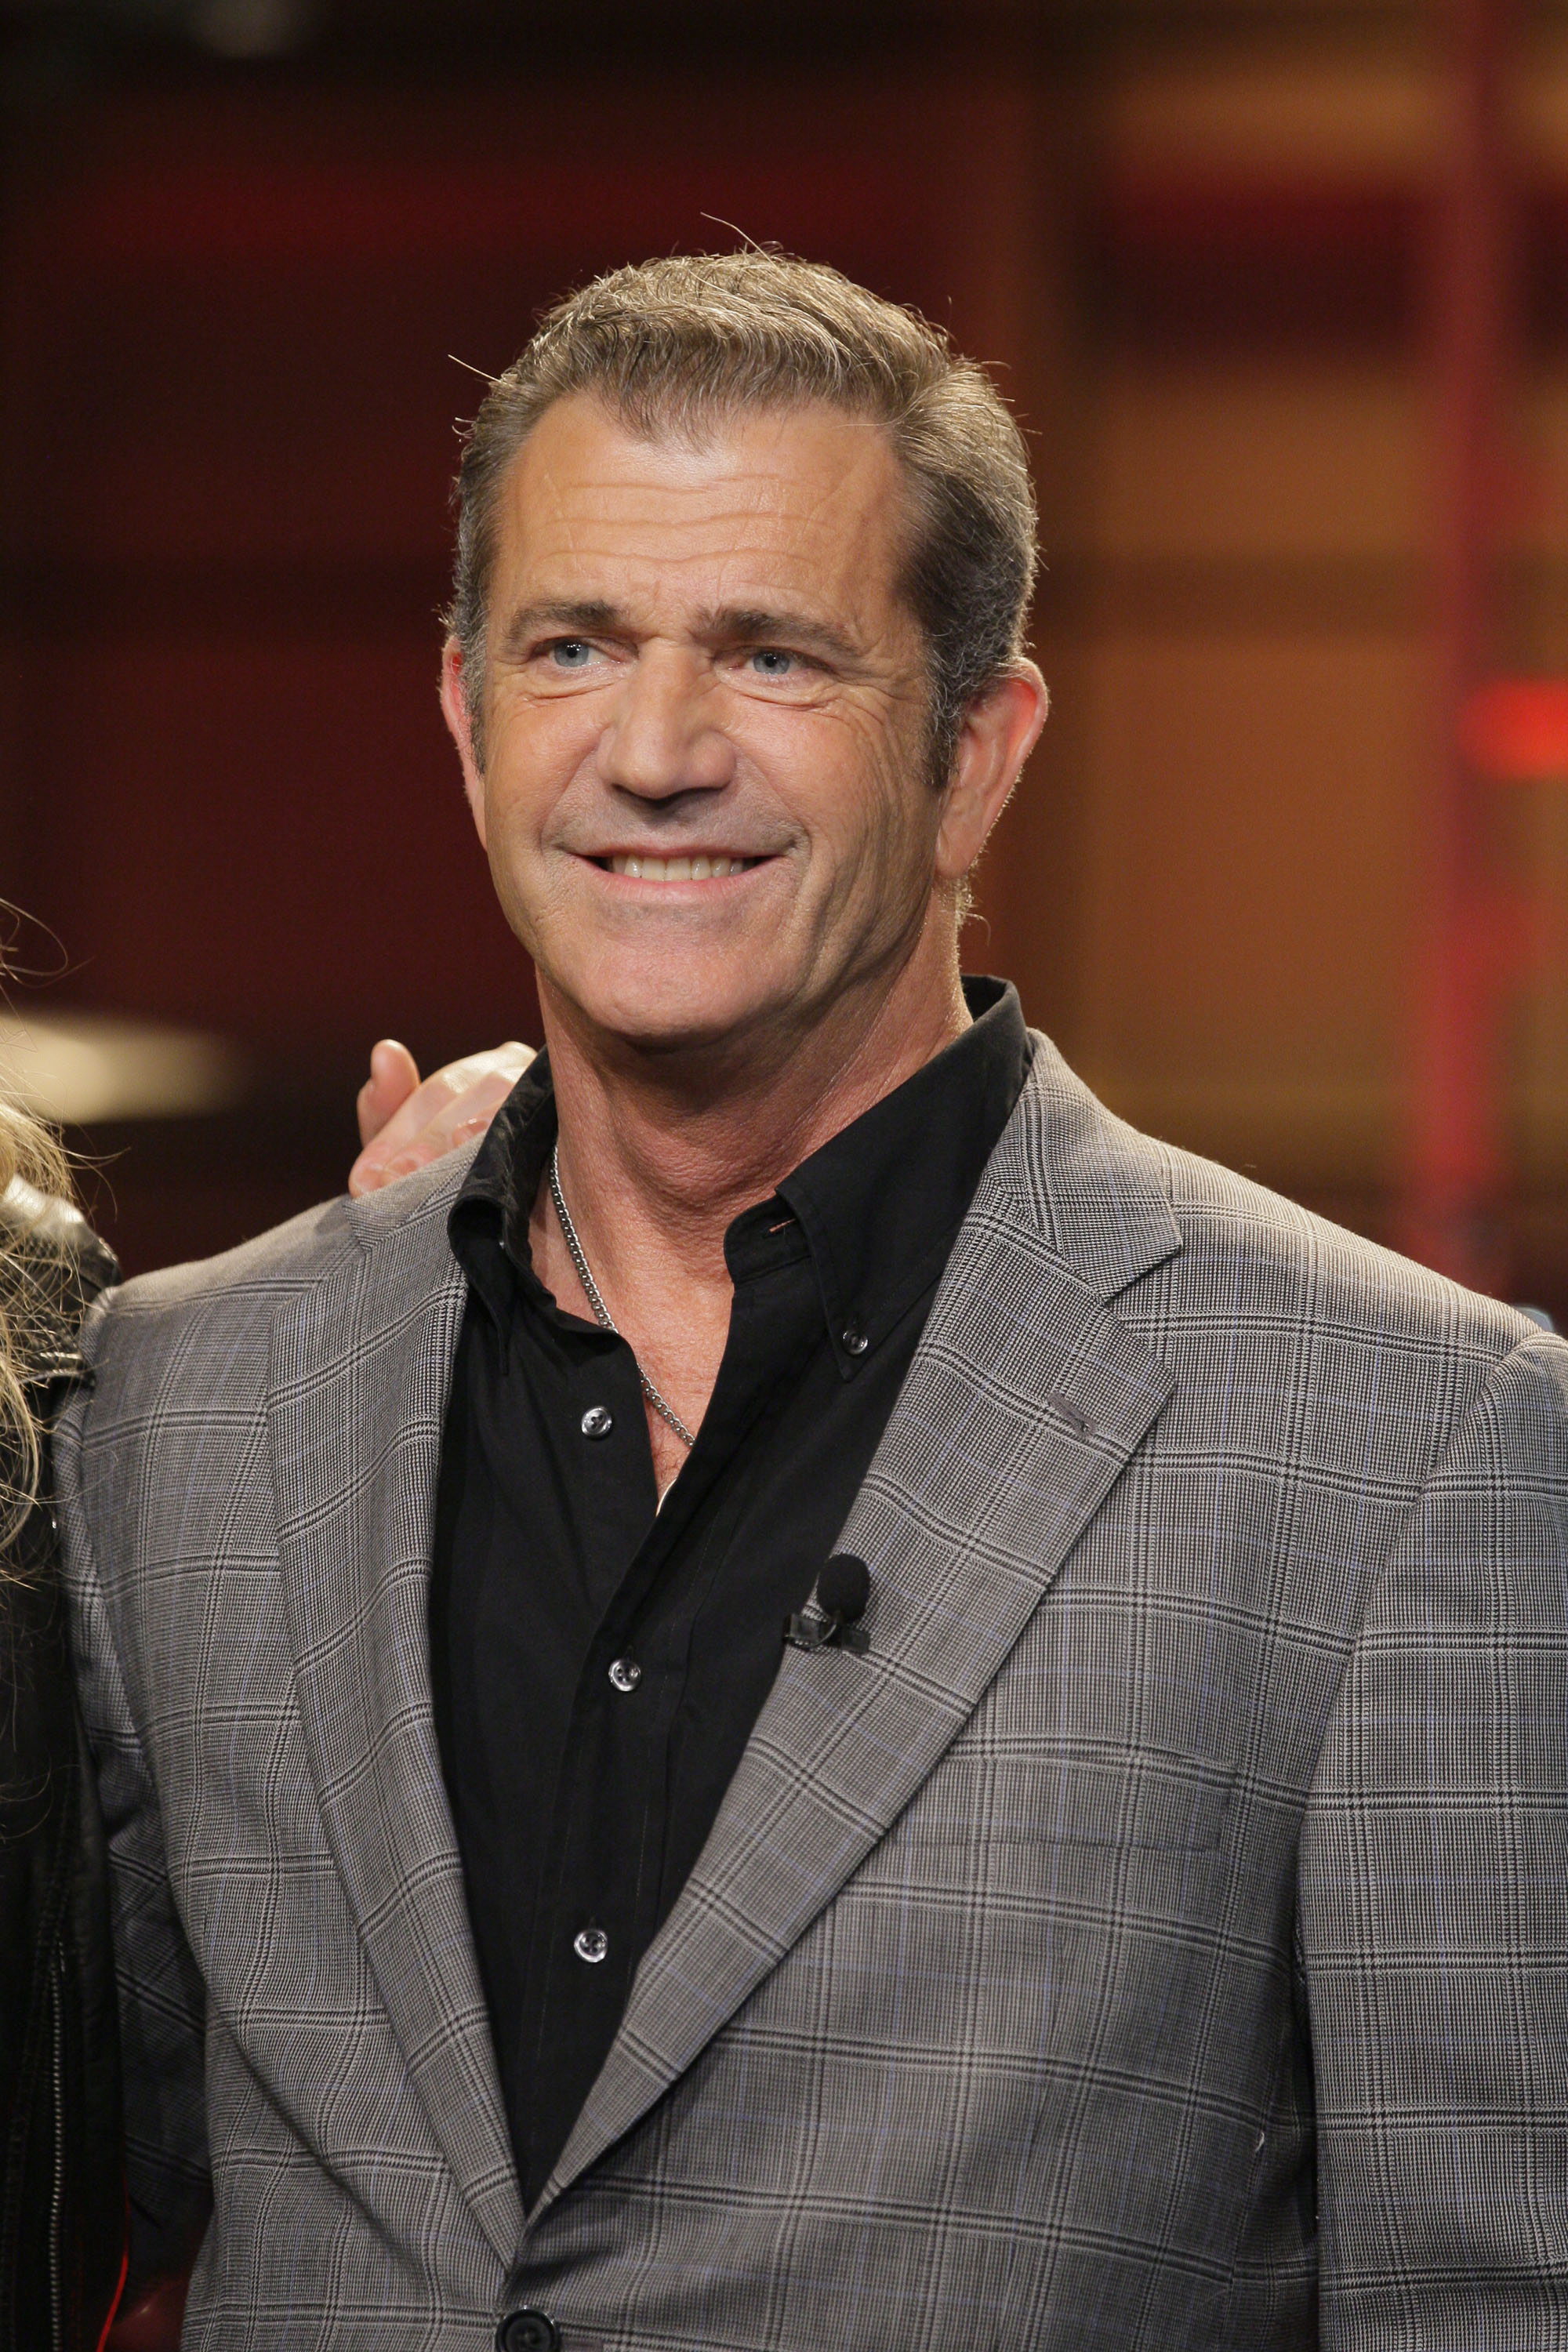 Mel Gibson at "The Tonight Show with Jay Leno" on April 27, 2012 | Source: Getty Images